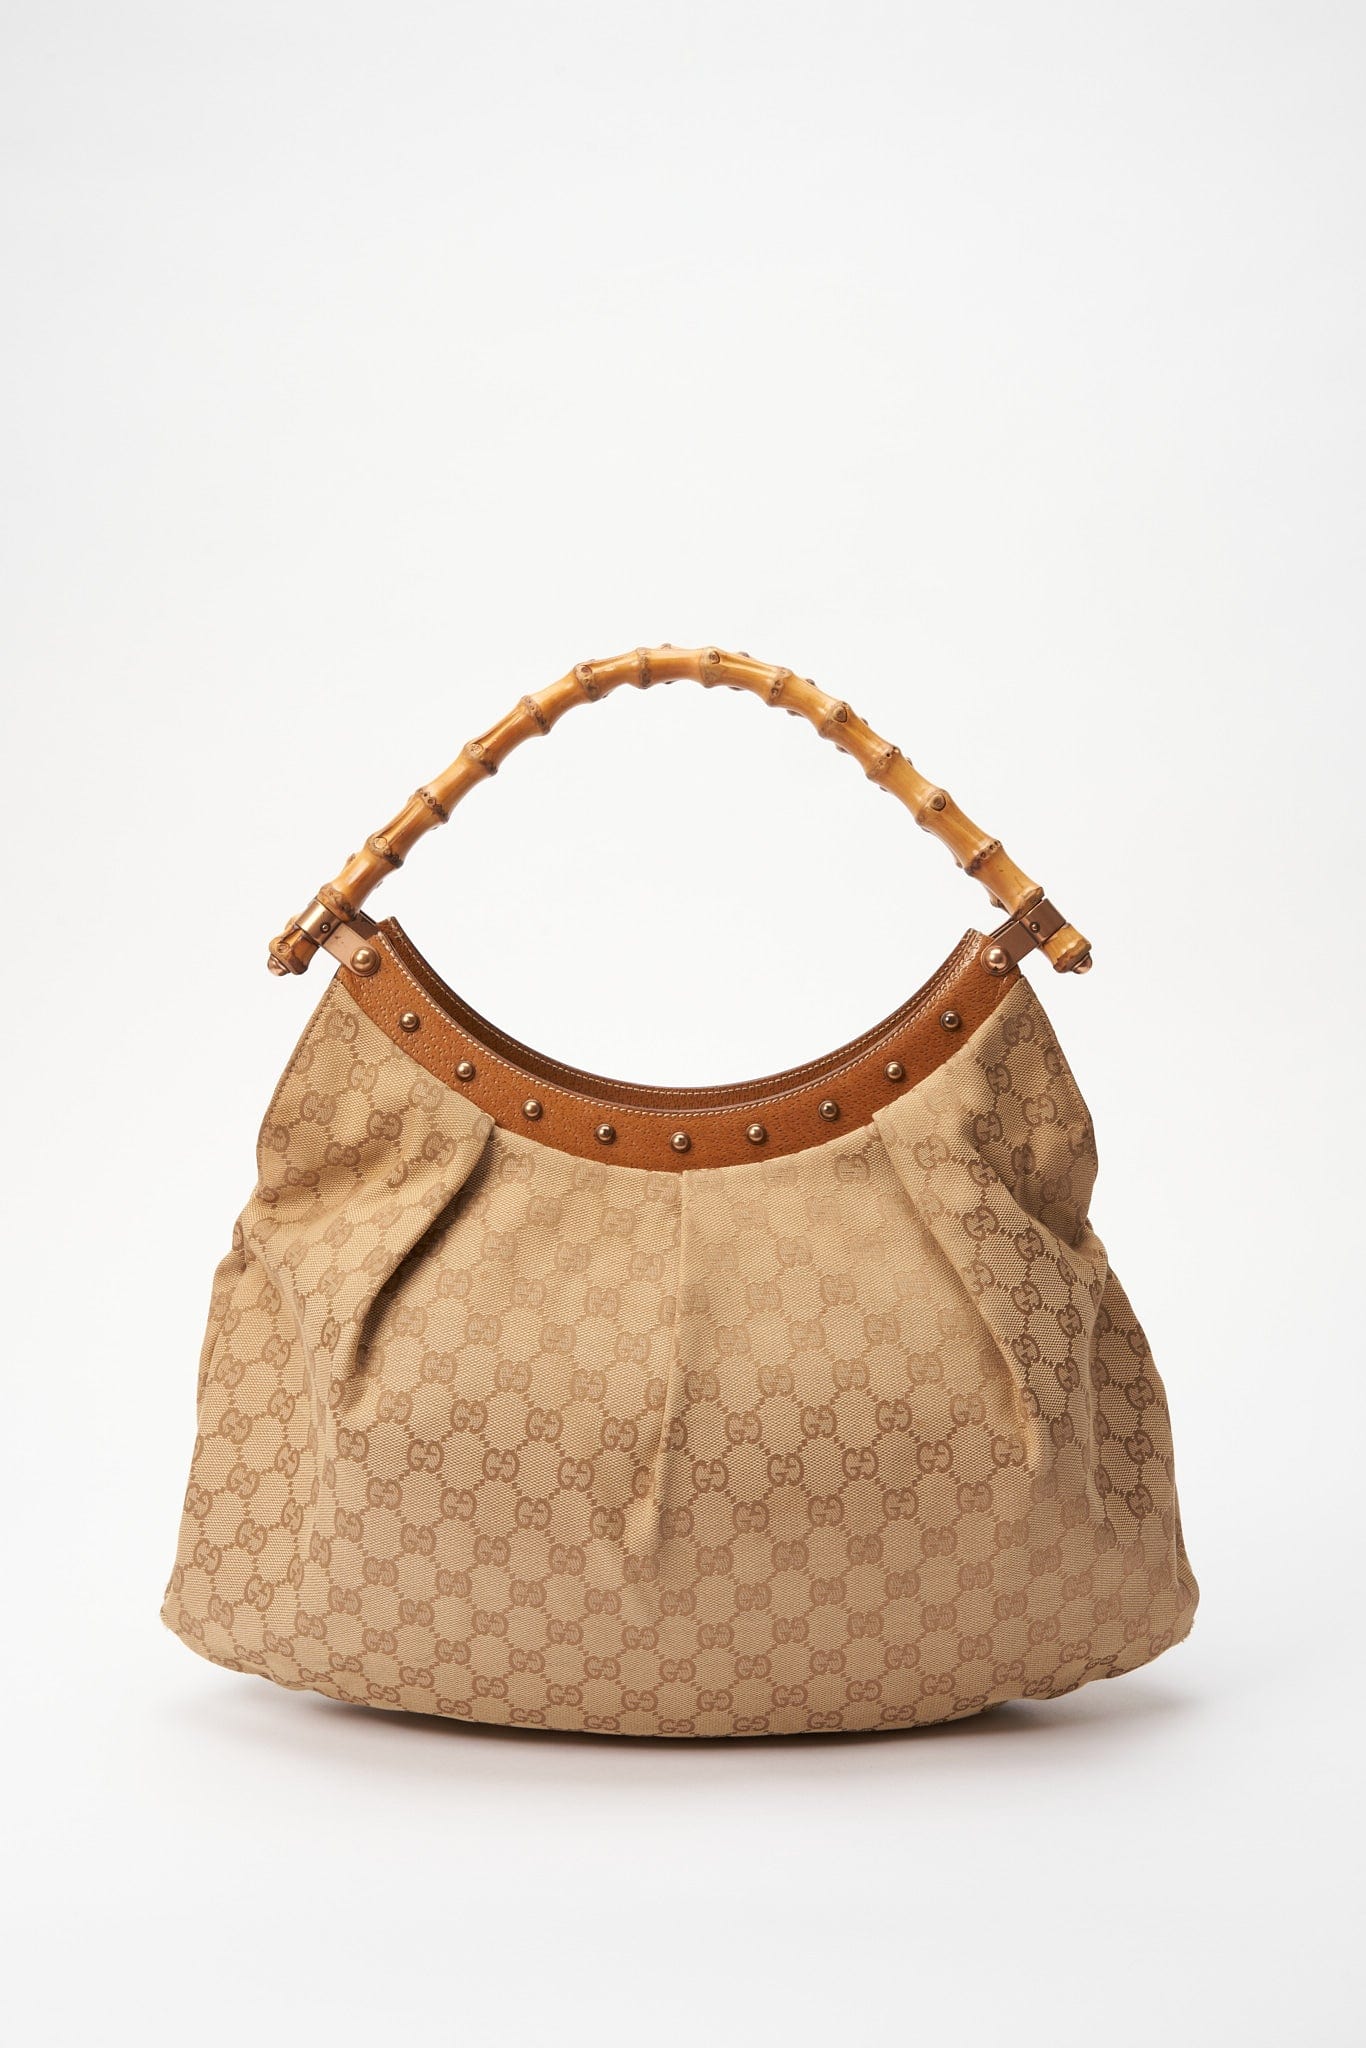 Vintage Gucci Bag with Bamboo Handle